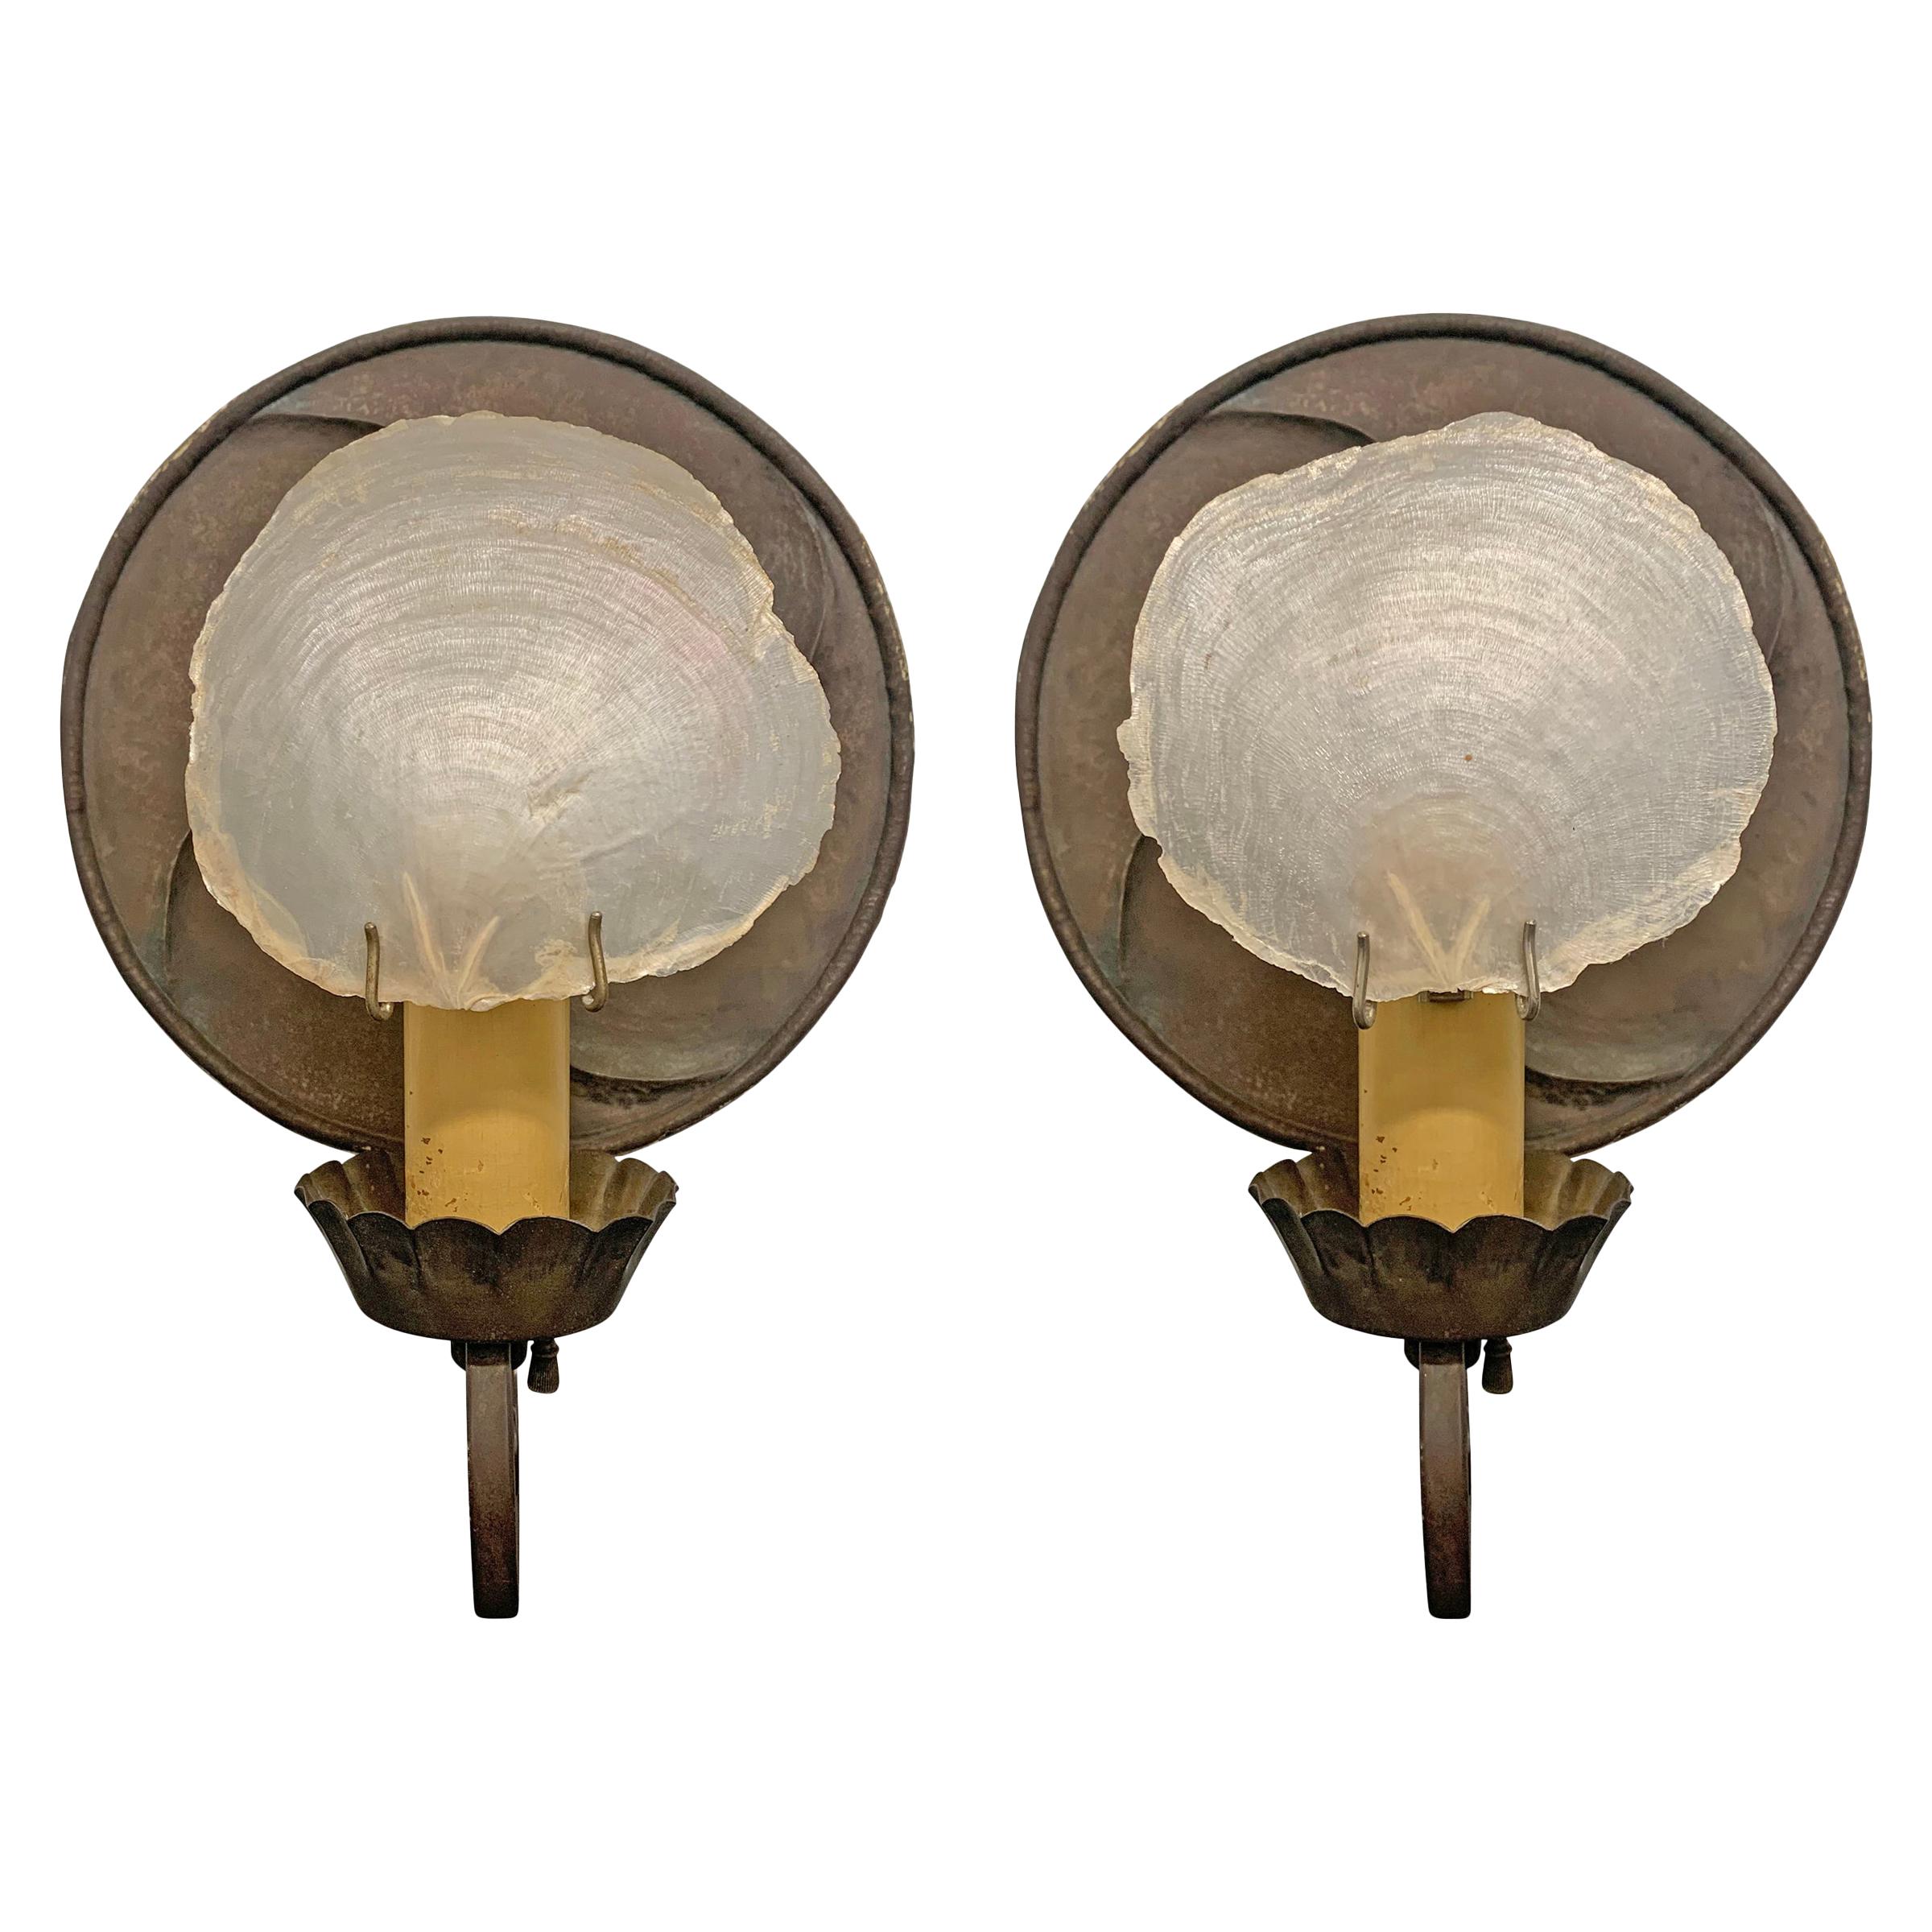 Pair of Sconces Designed by Architect Frank Forster, 1934